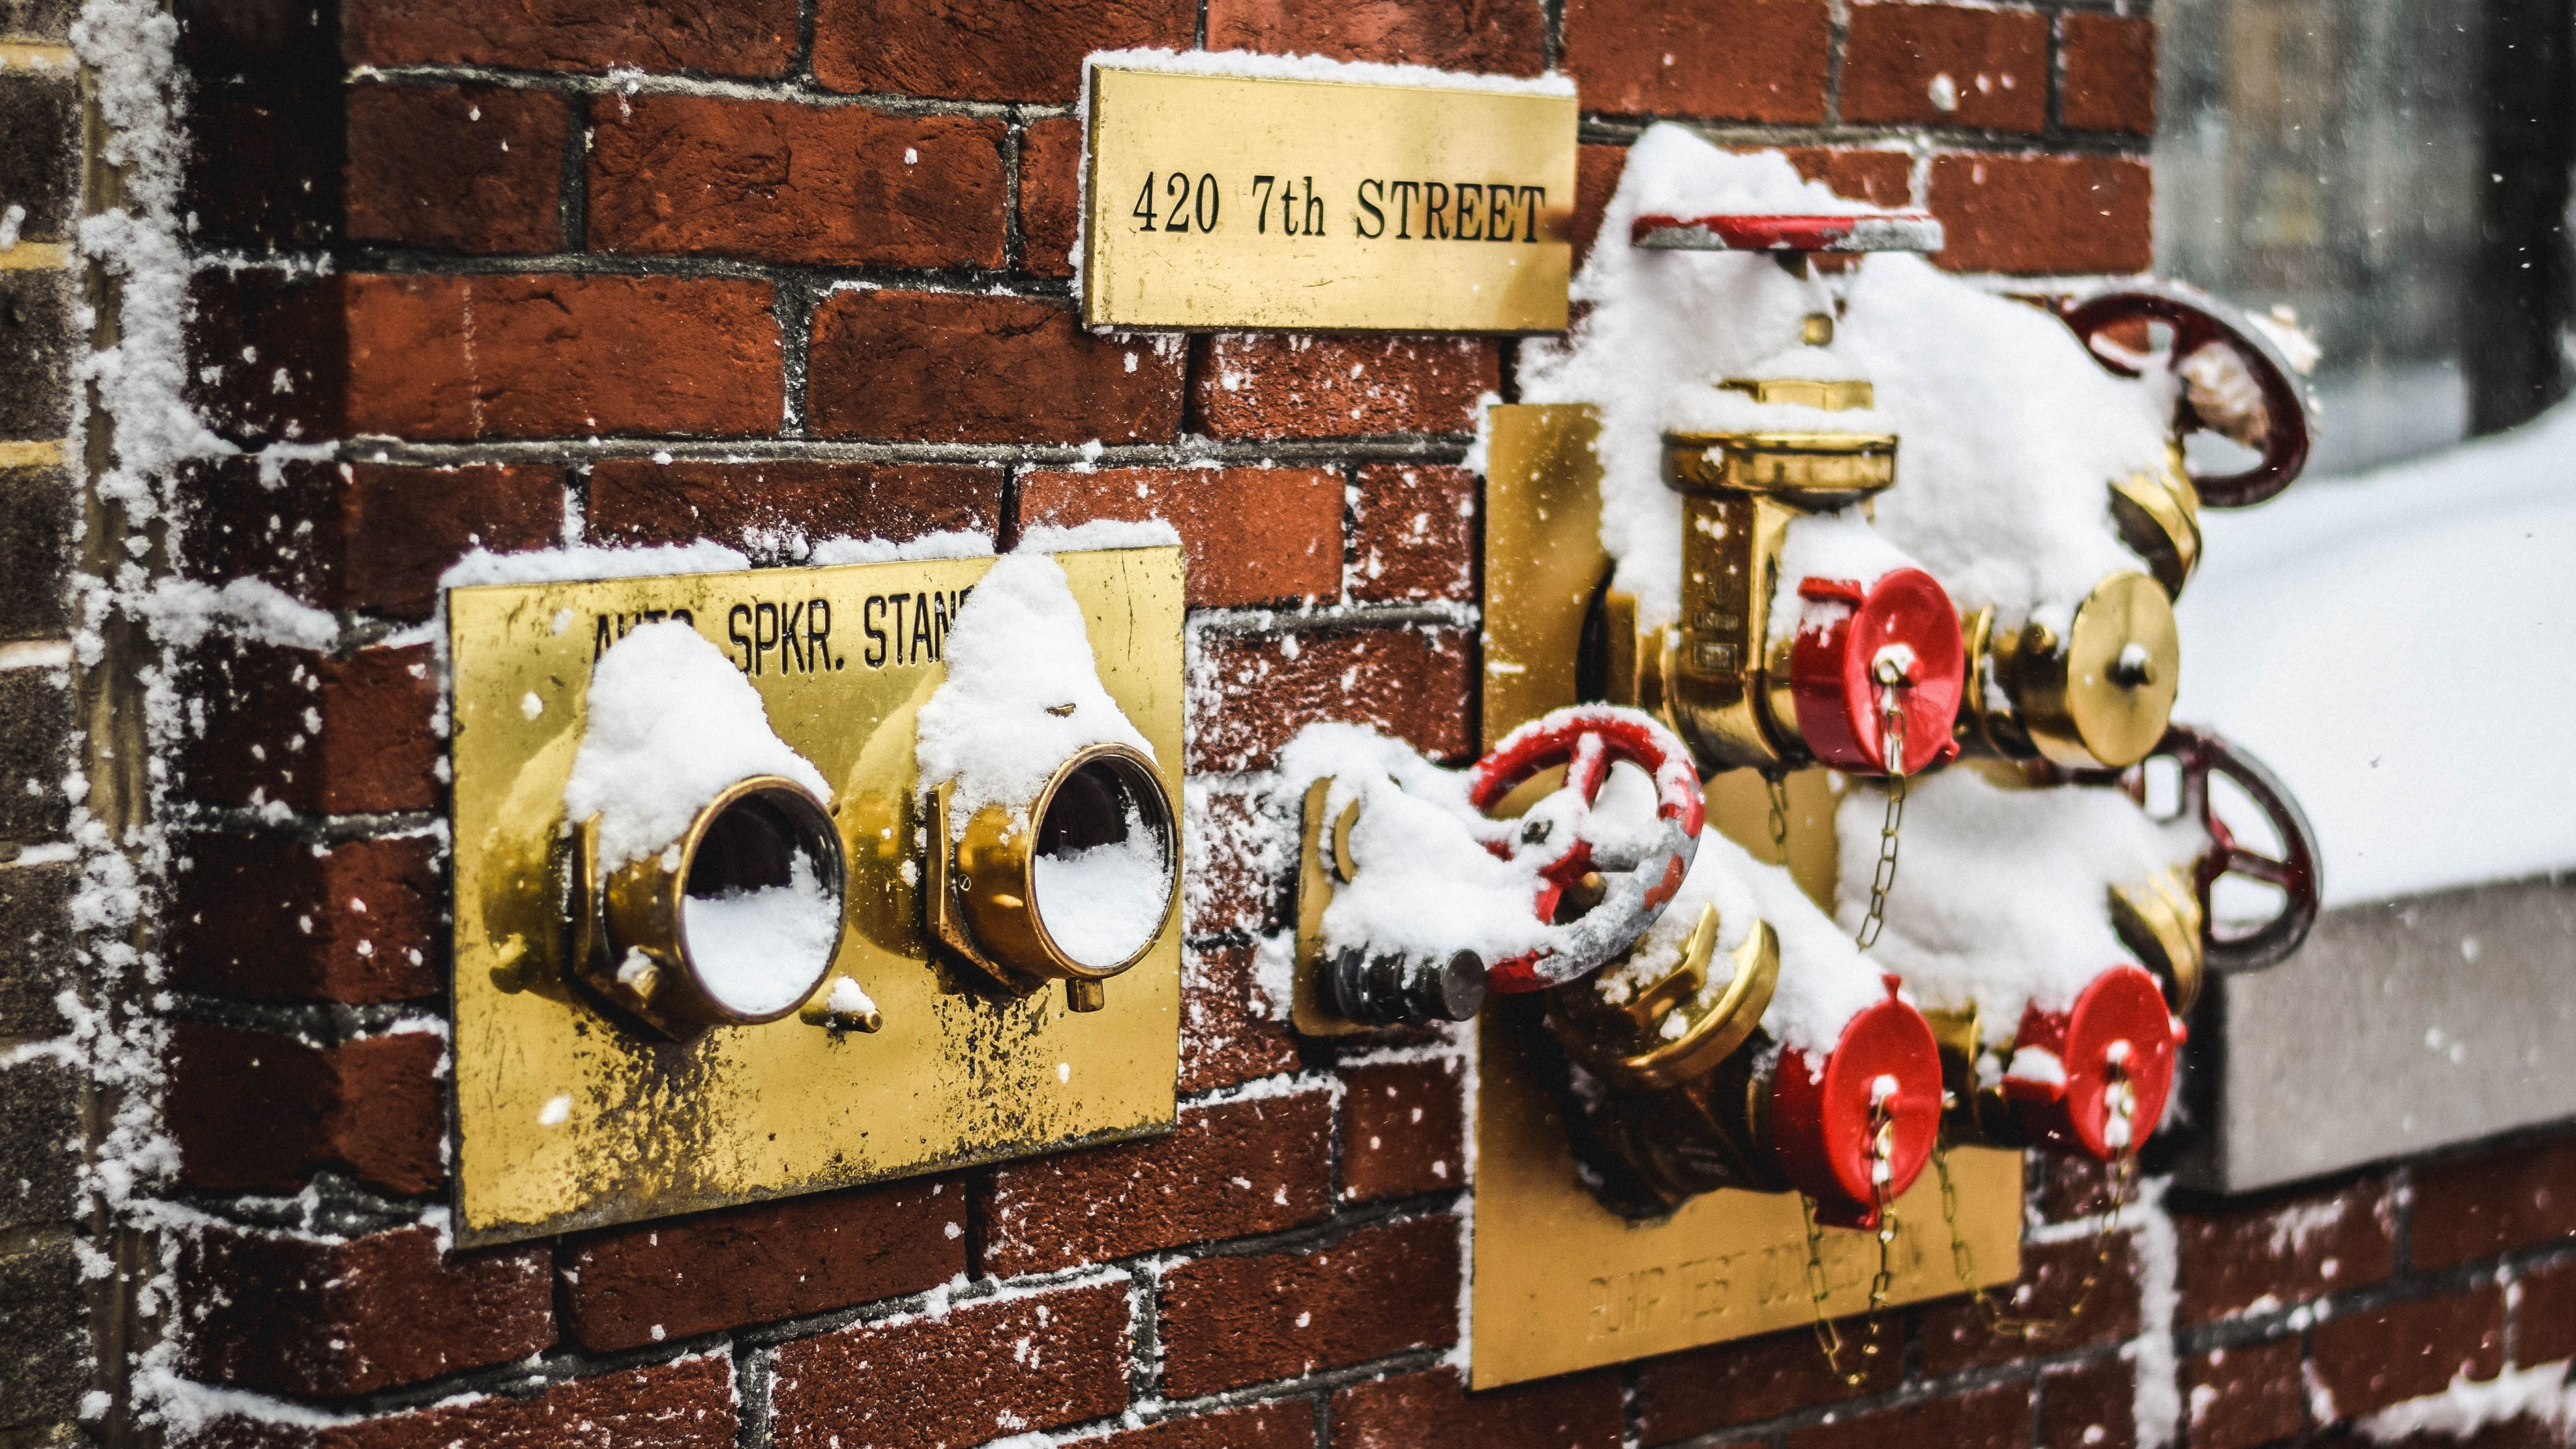 Snow covered fire standpipes in Washington wallpaper 3840x2160